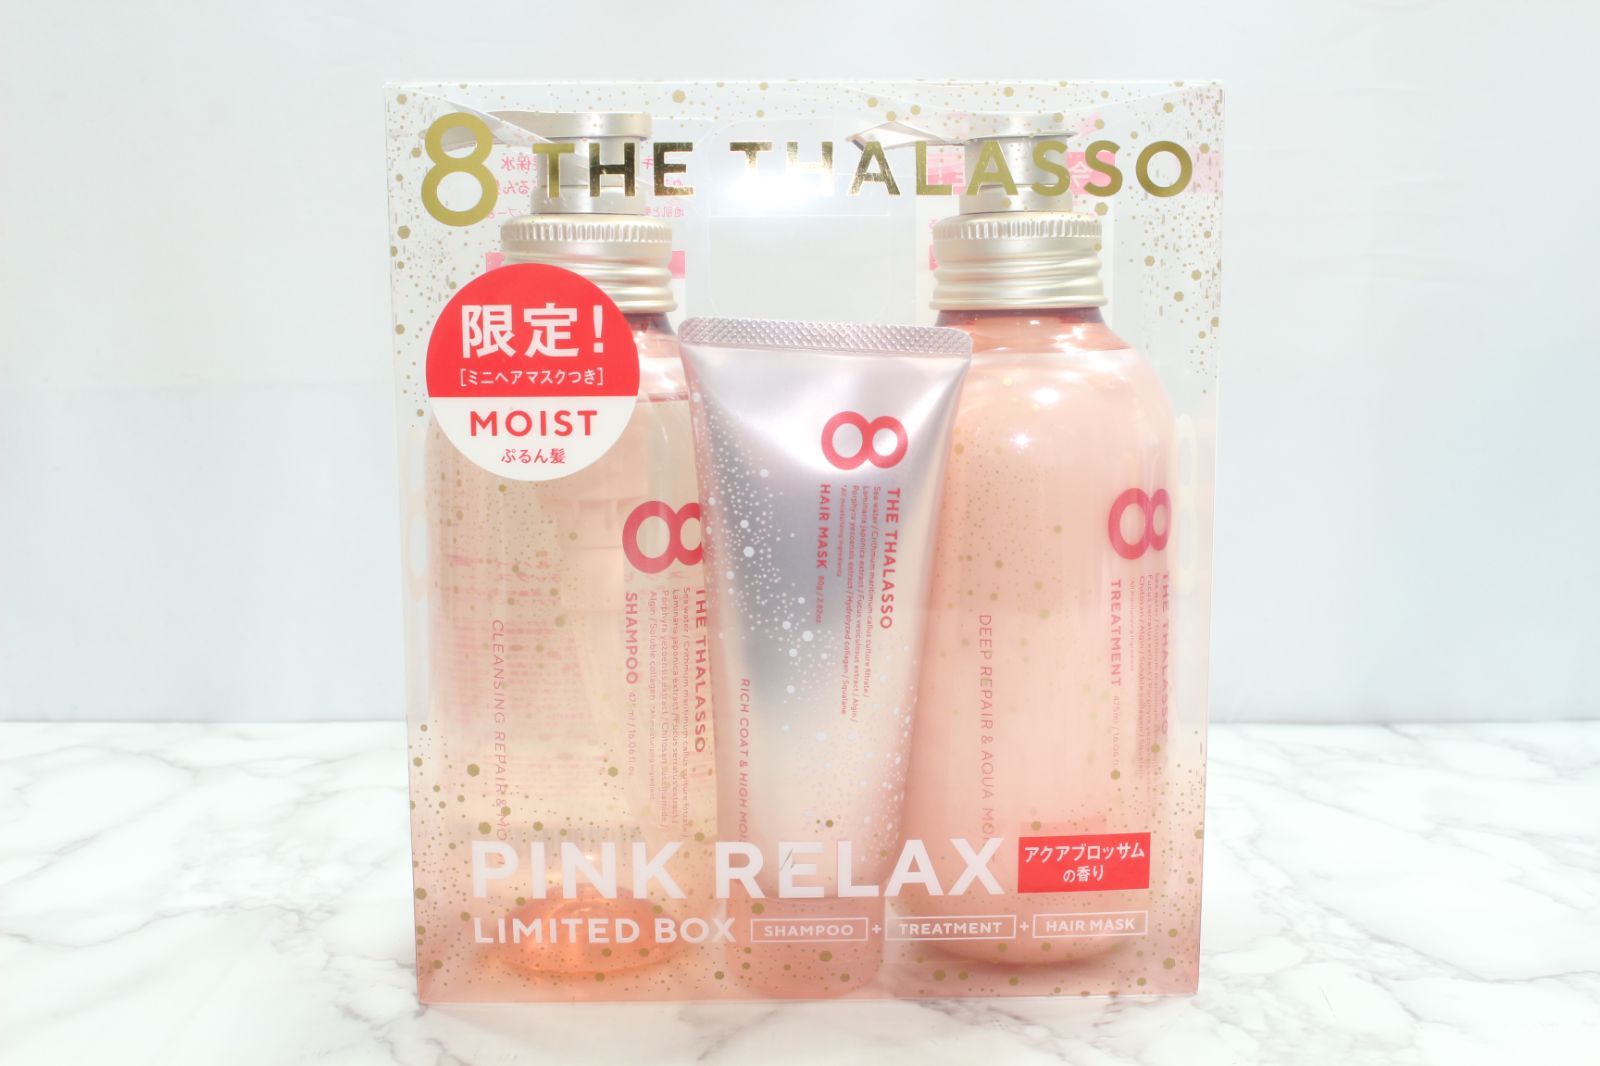 THE RELAX PINK THALASSO MOIST 8 - 3